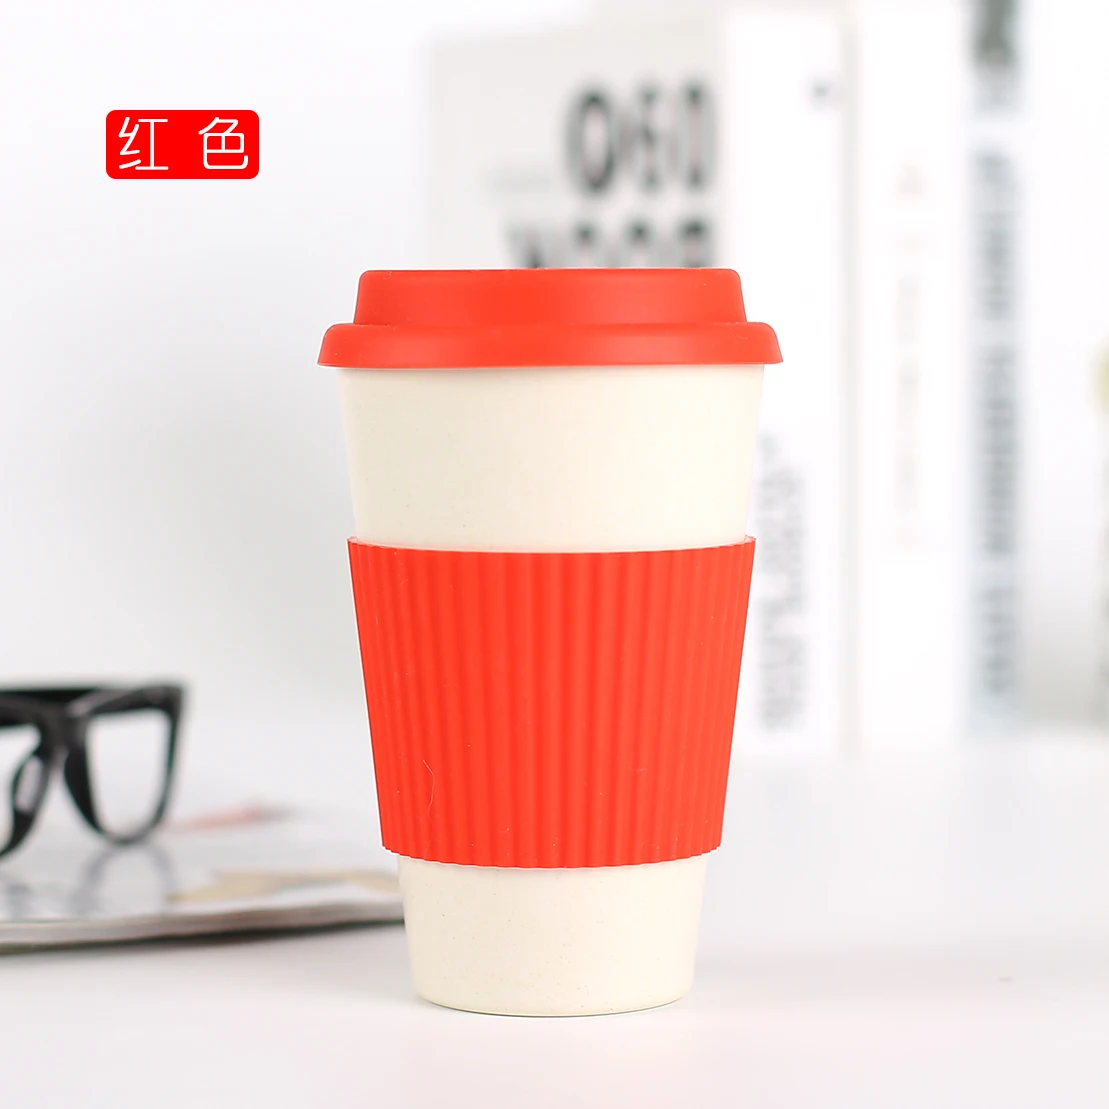 Eco-Friendly Coffee Mugs Drink Cup price in Egypt | Jumia Egypt | kanbkam